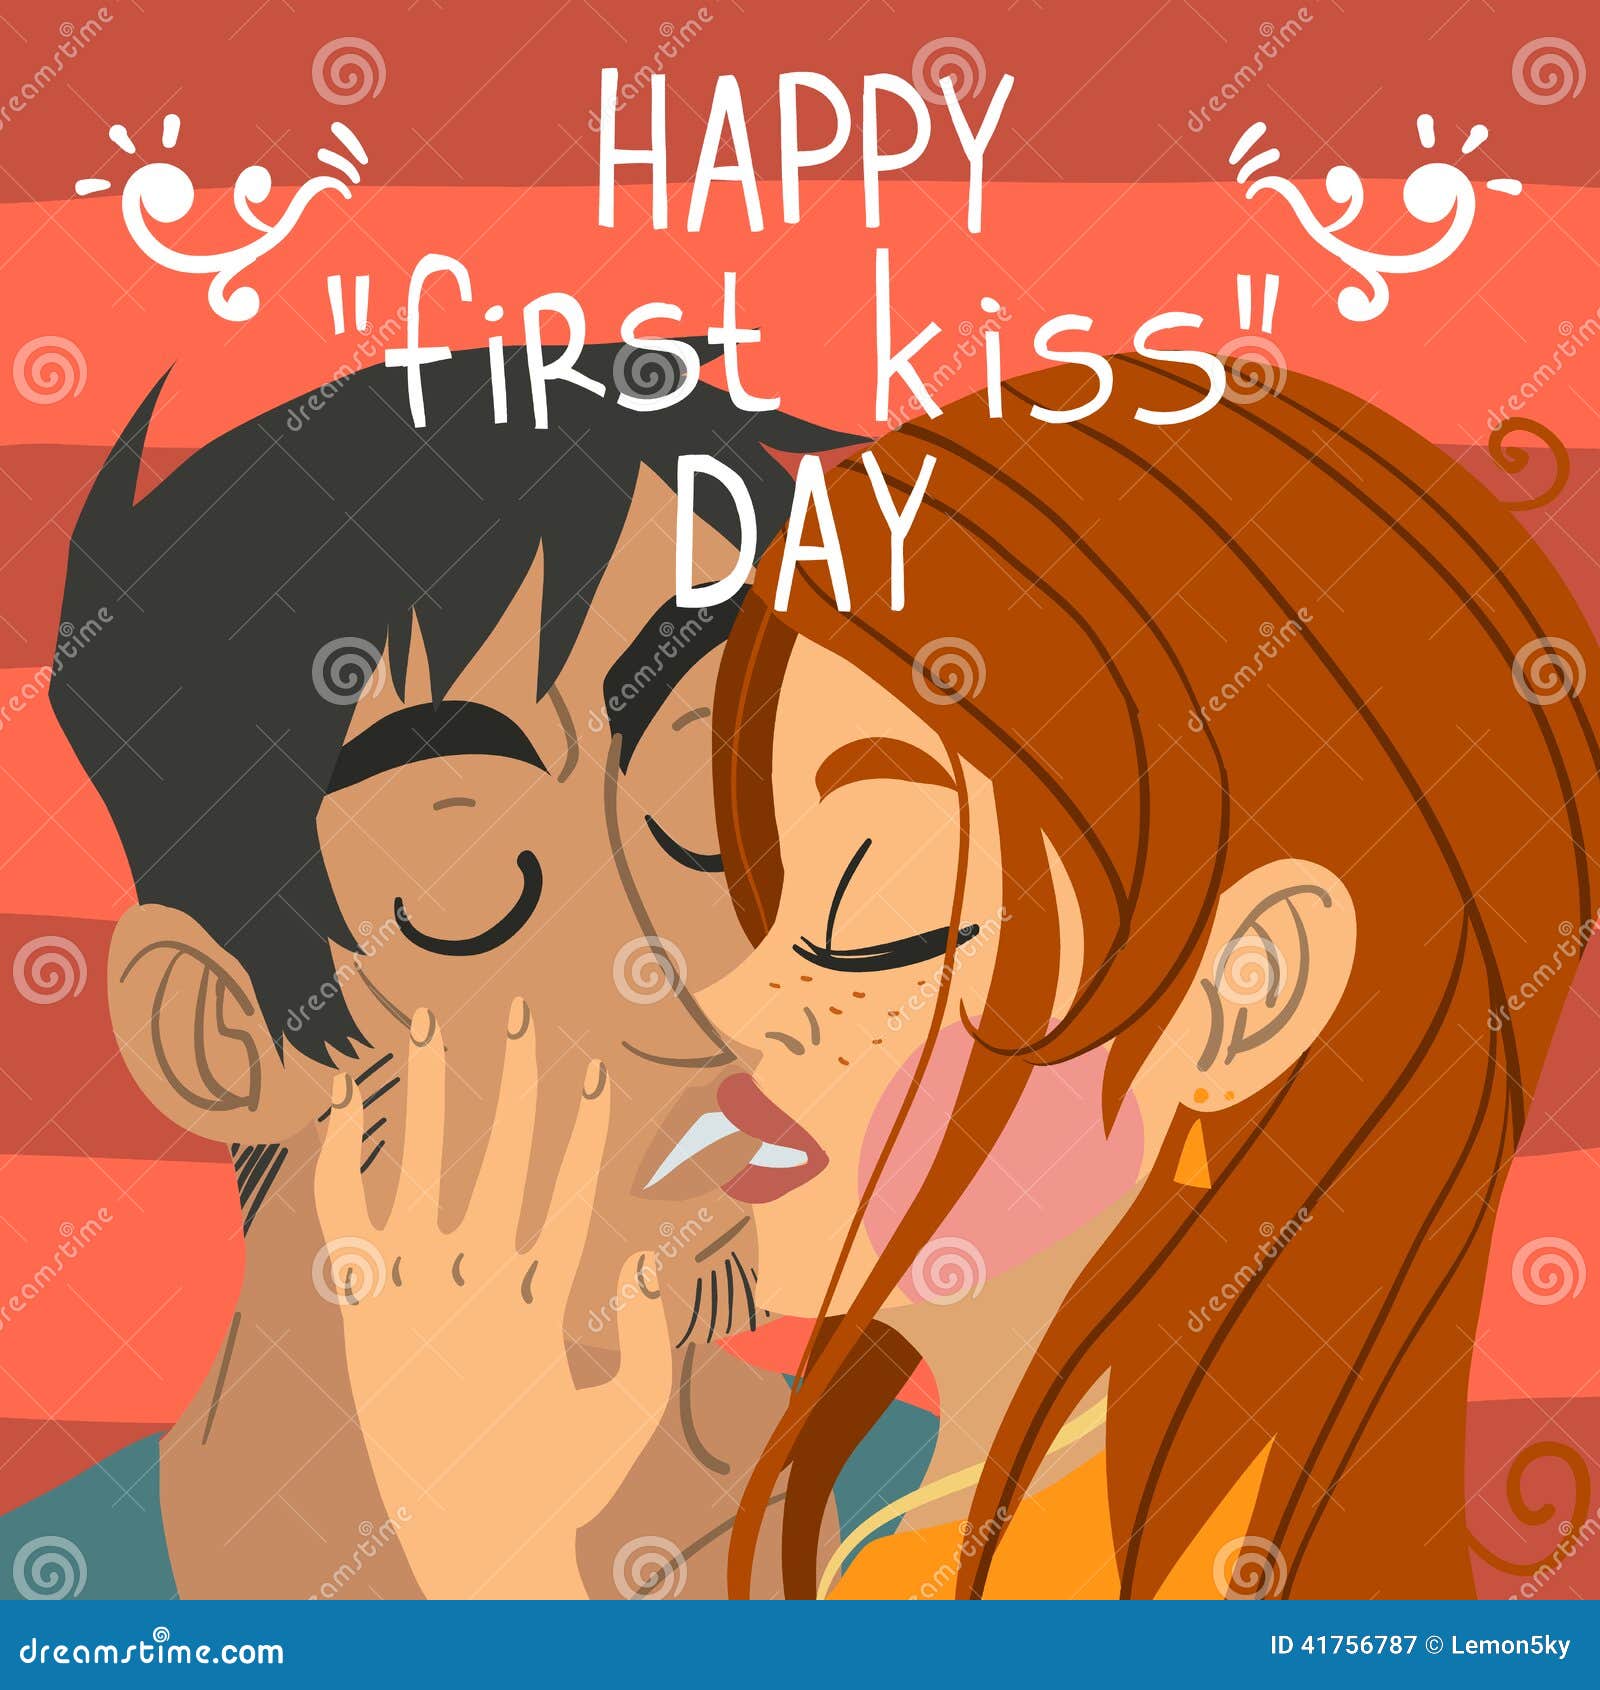 Happy First Kiss Day Greeting Card. Stock Vector - Illustration of ...